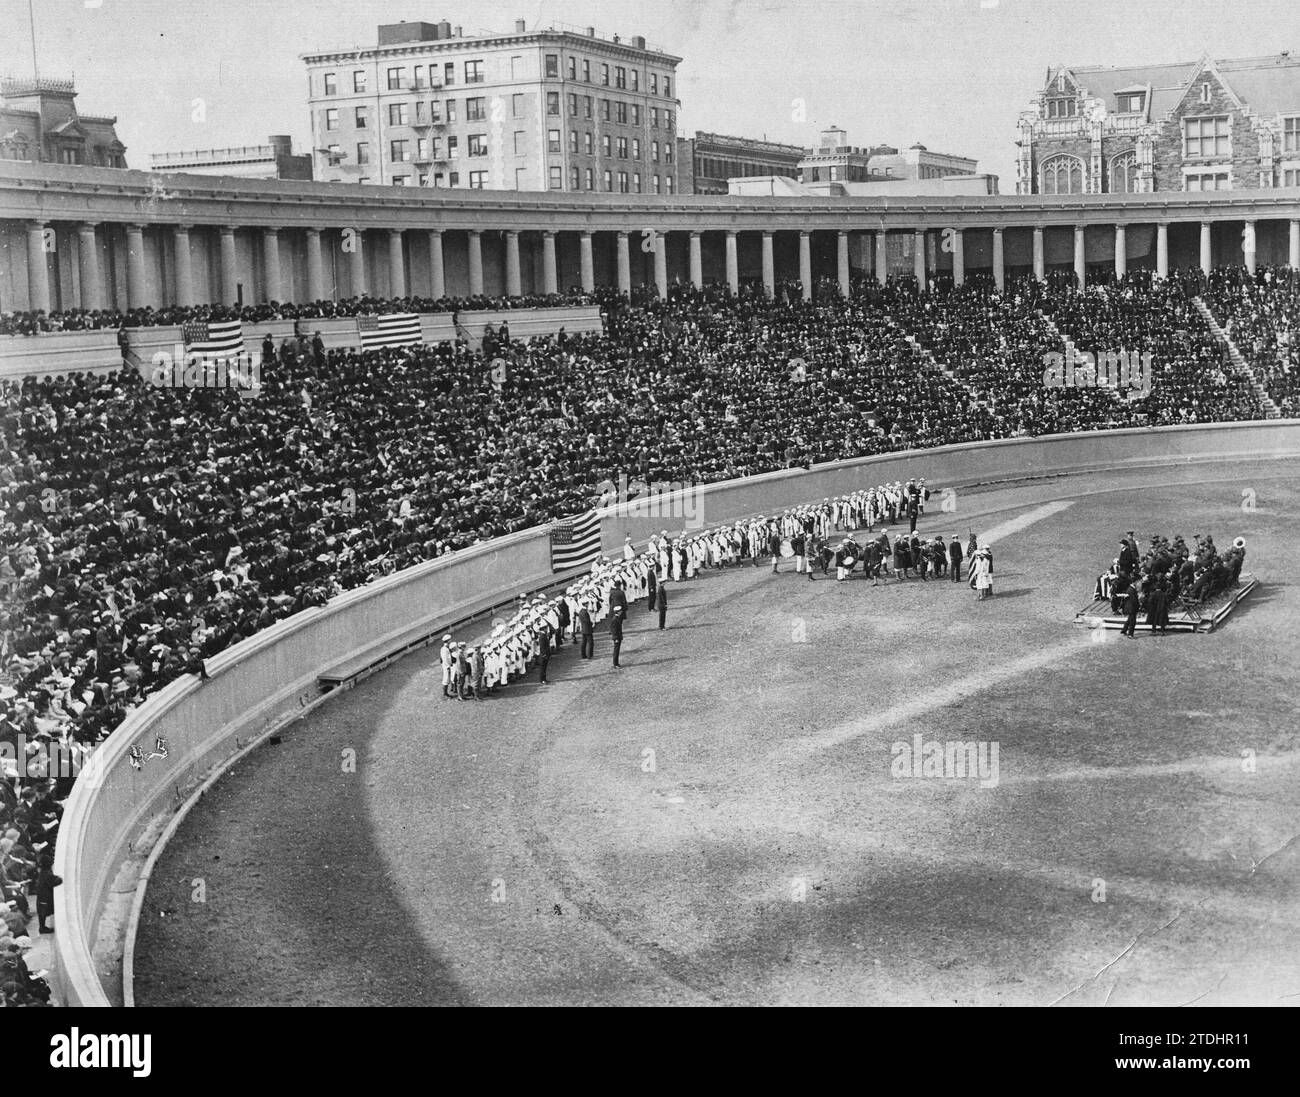 Ceremonies and Parades - Patriotic open air concert at City College Stadium. American Junior naval and Marine Scouts singing 'Yankee Doodle' before immense crowd, 1917 Stock Photo